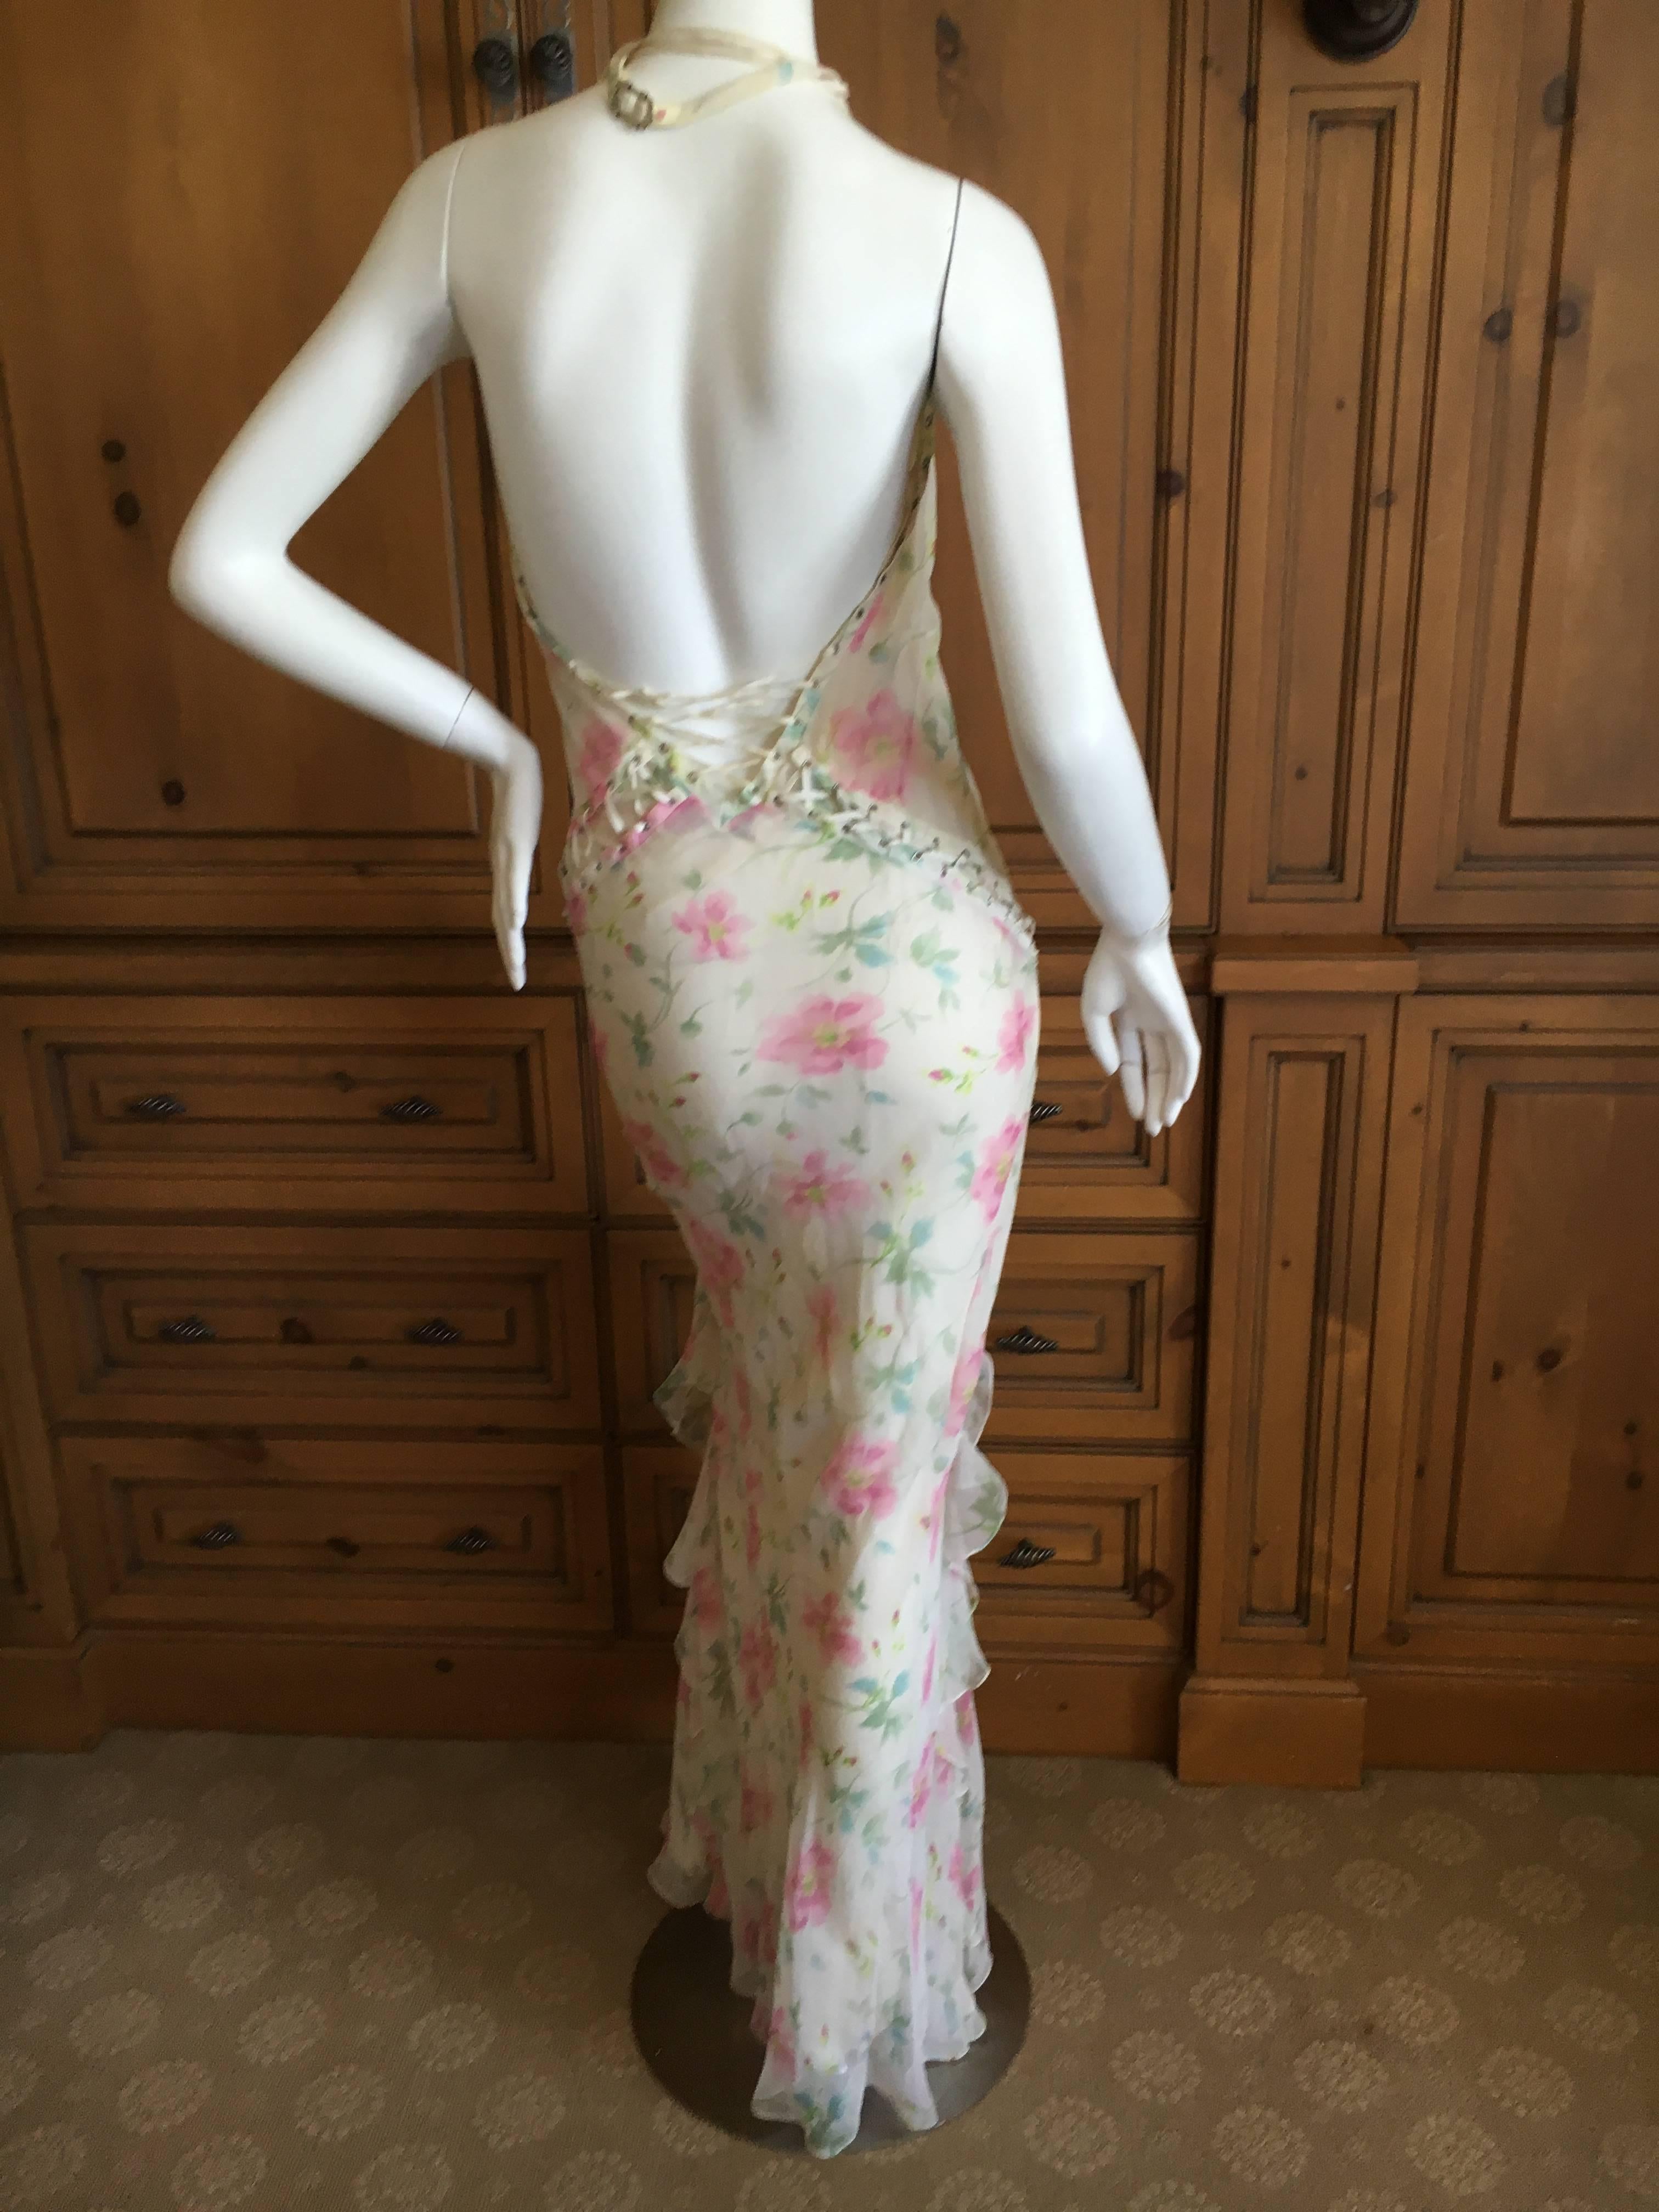 Dior by Galliano Sweet Ruffled Silk Floral Dress with Corset Lace Details 4